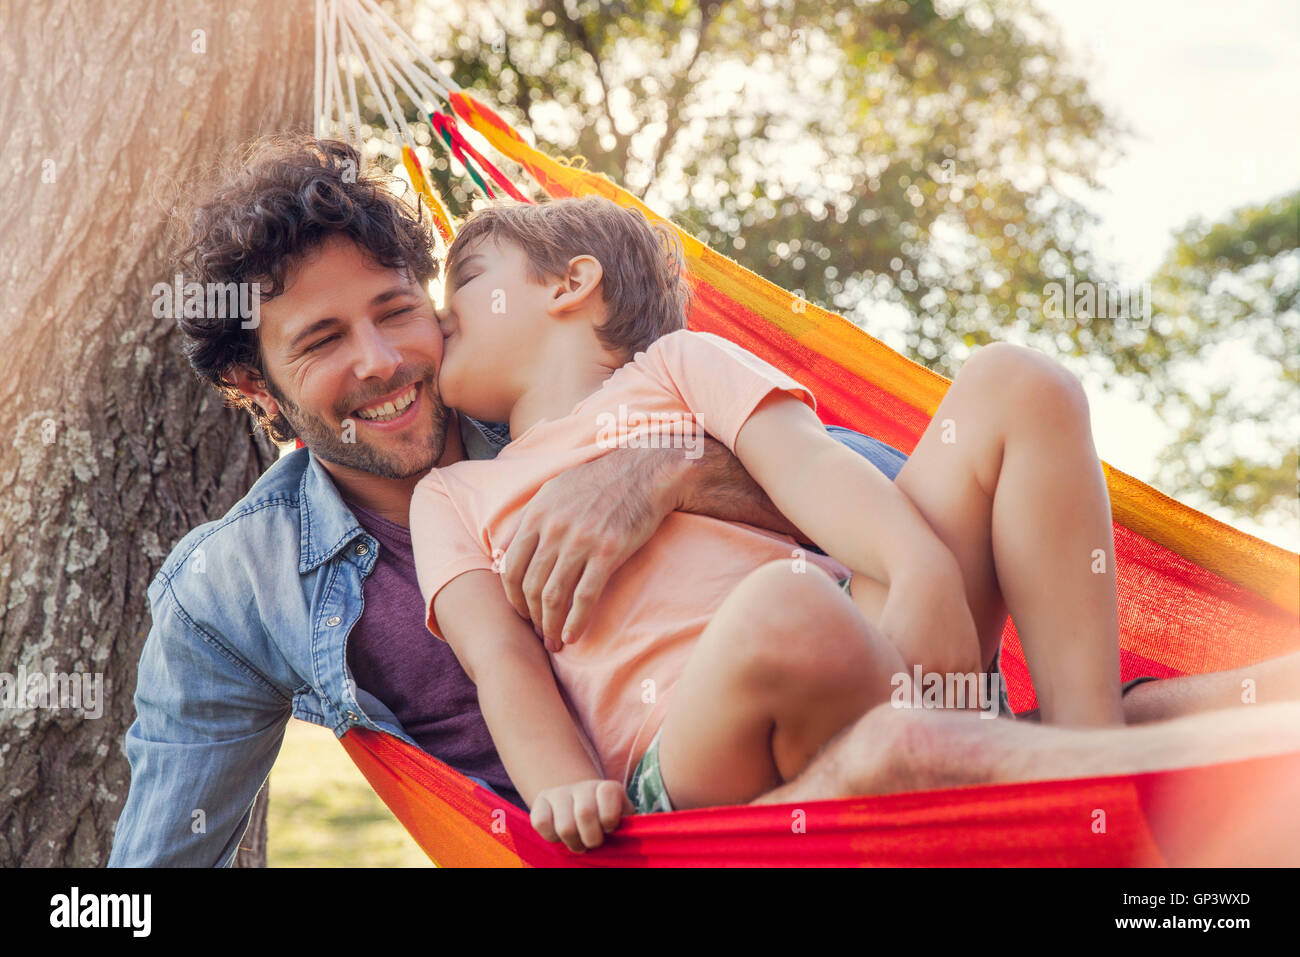 Father and son relaxing together in hammock Stock Photo